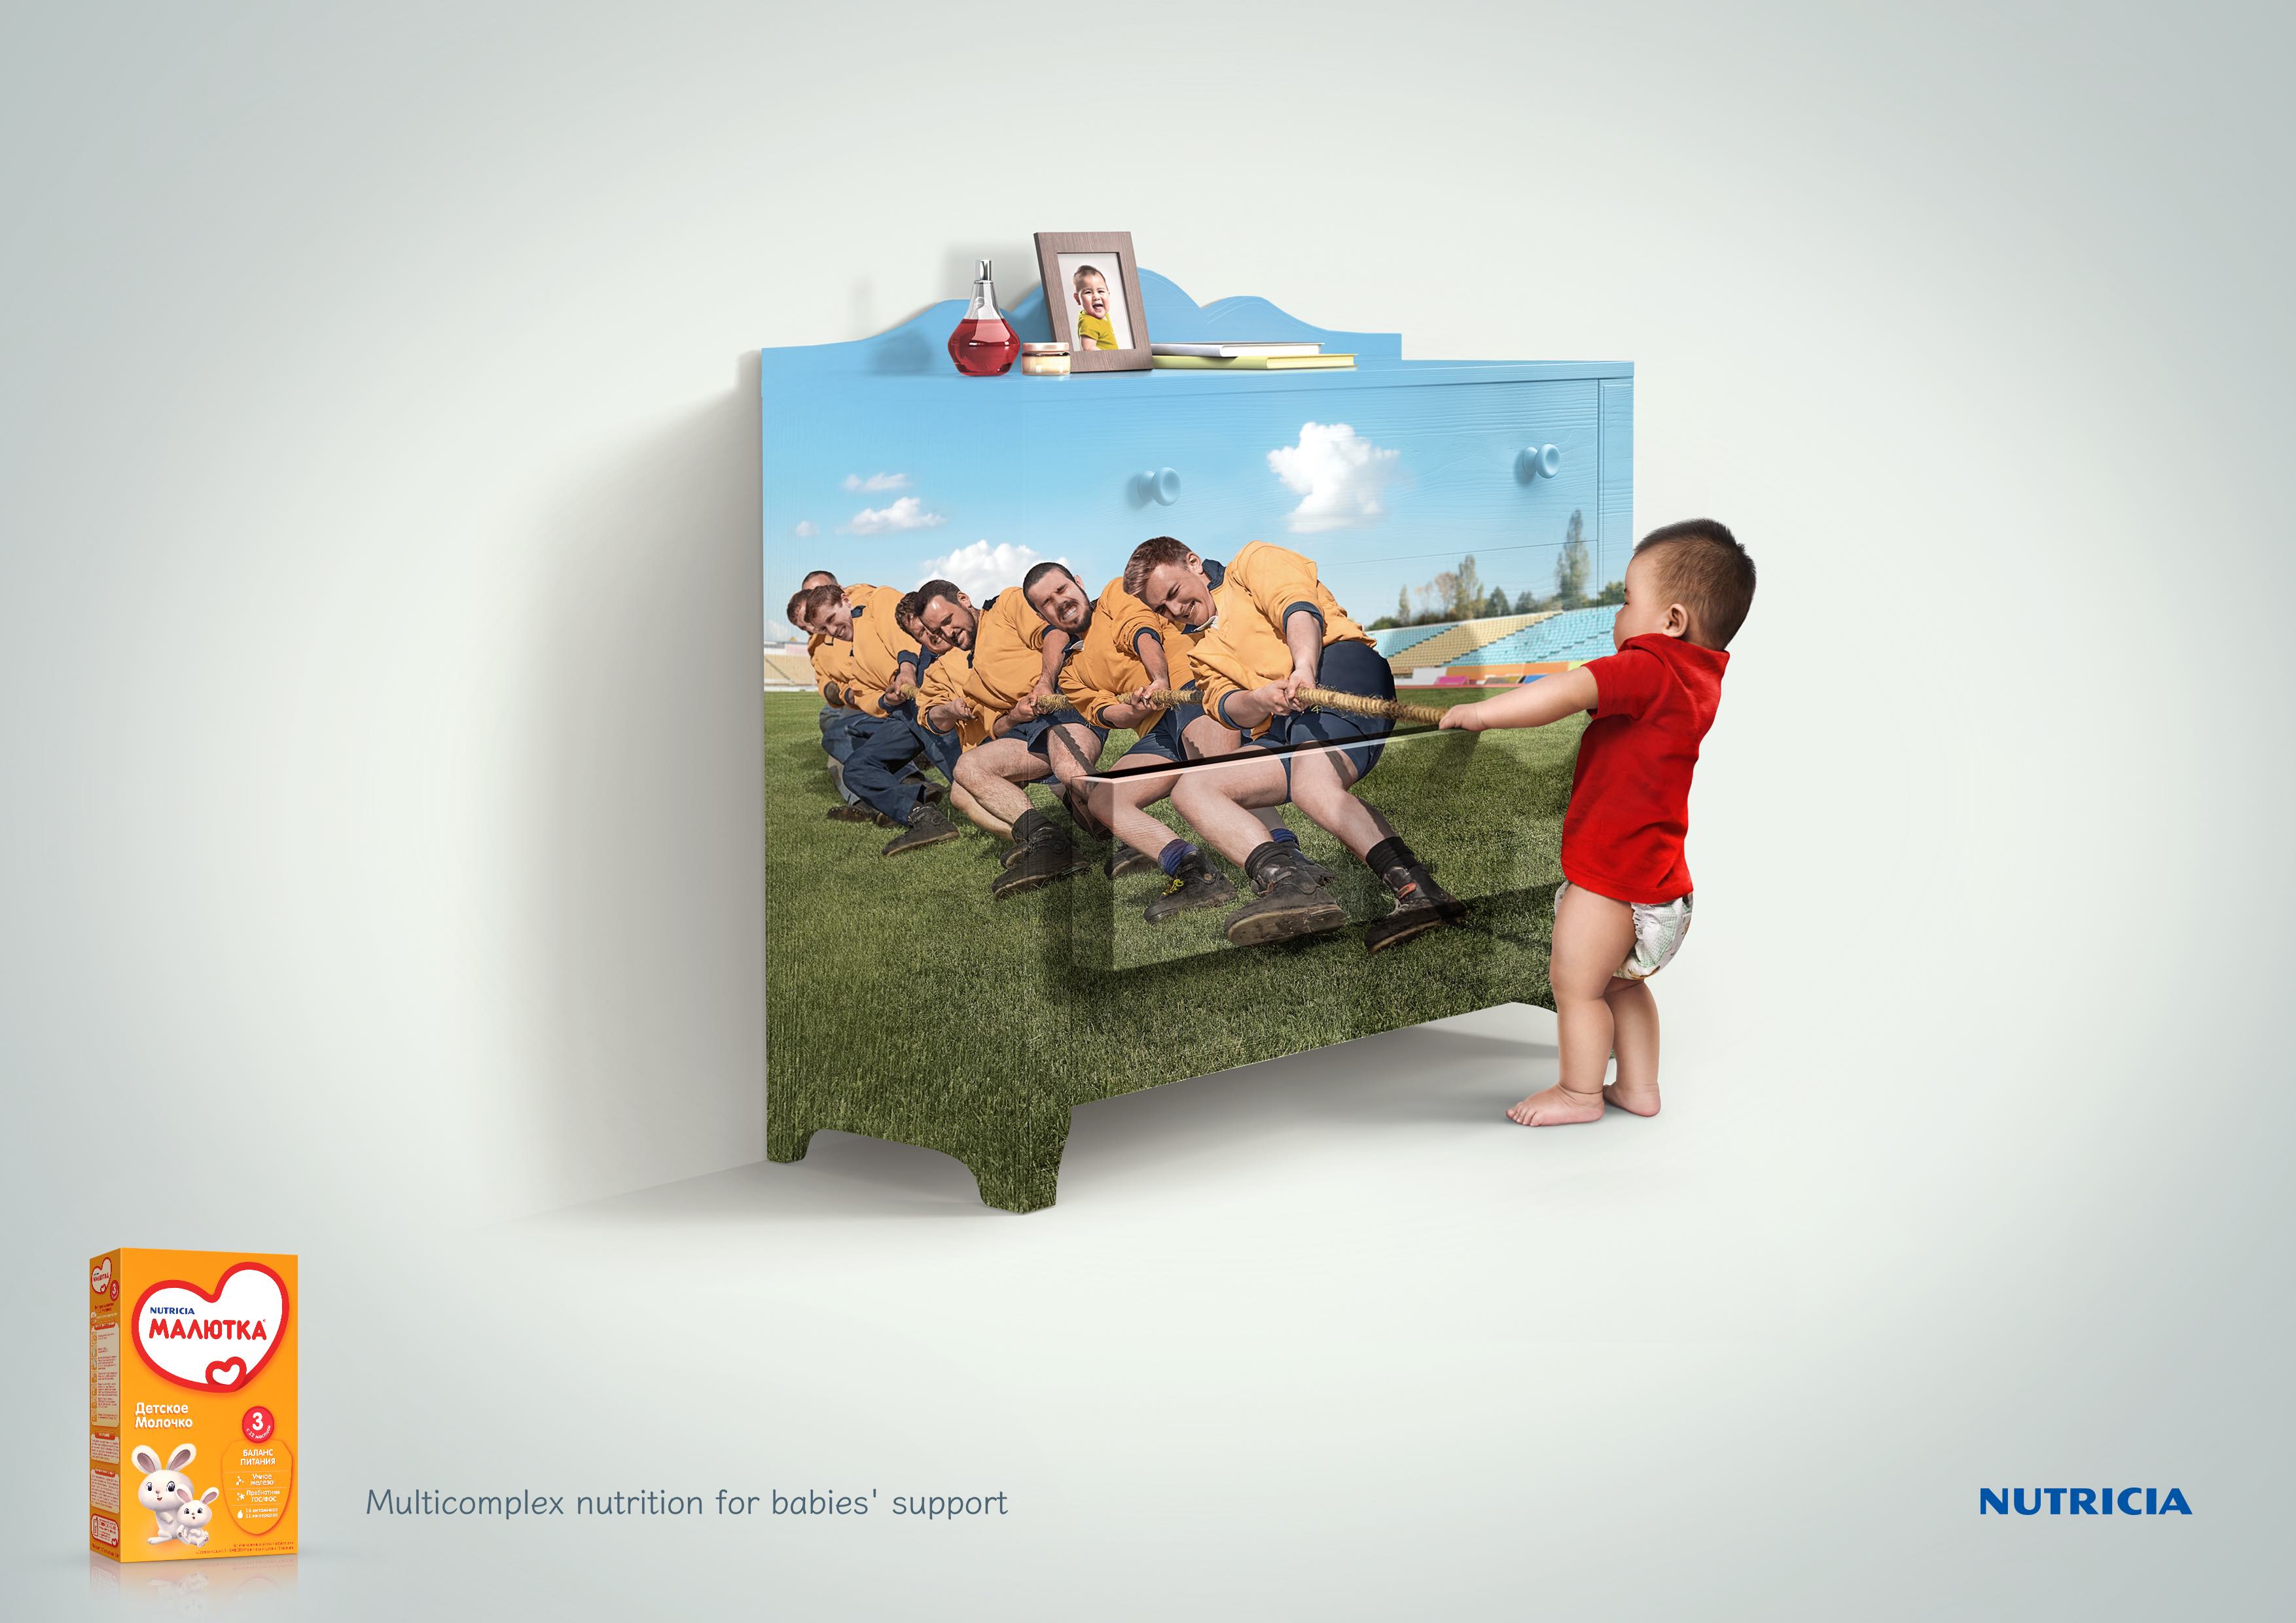 Malyutka - Multicomplex nutrition for babies' support Campaigns of the World®